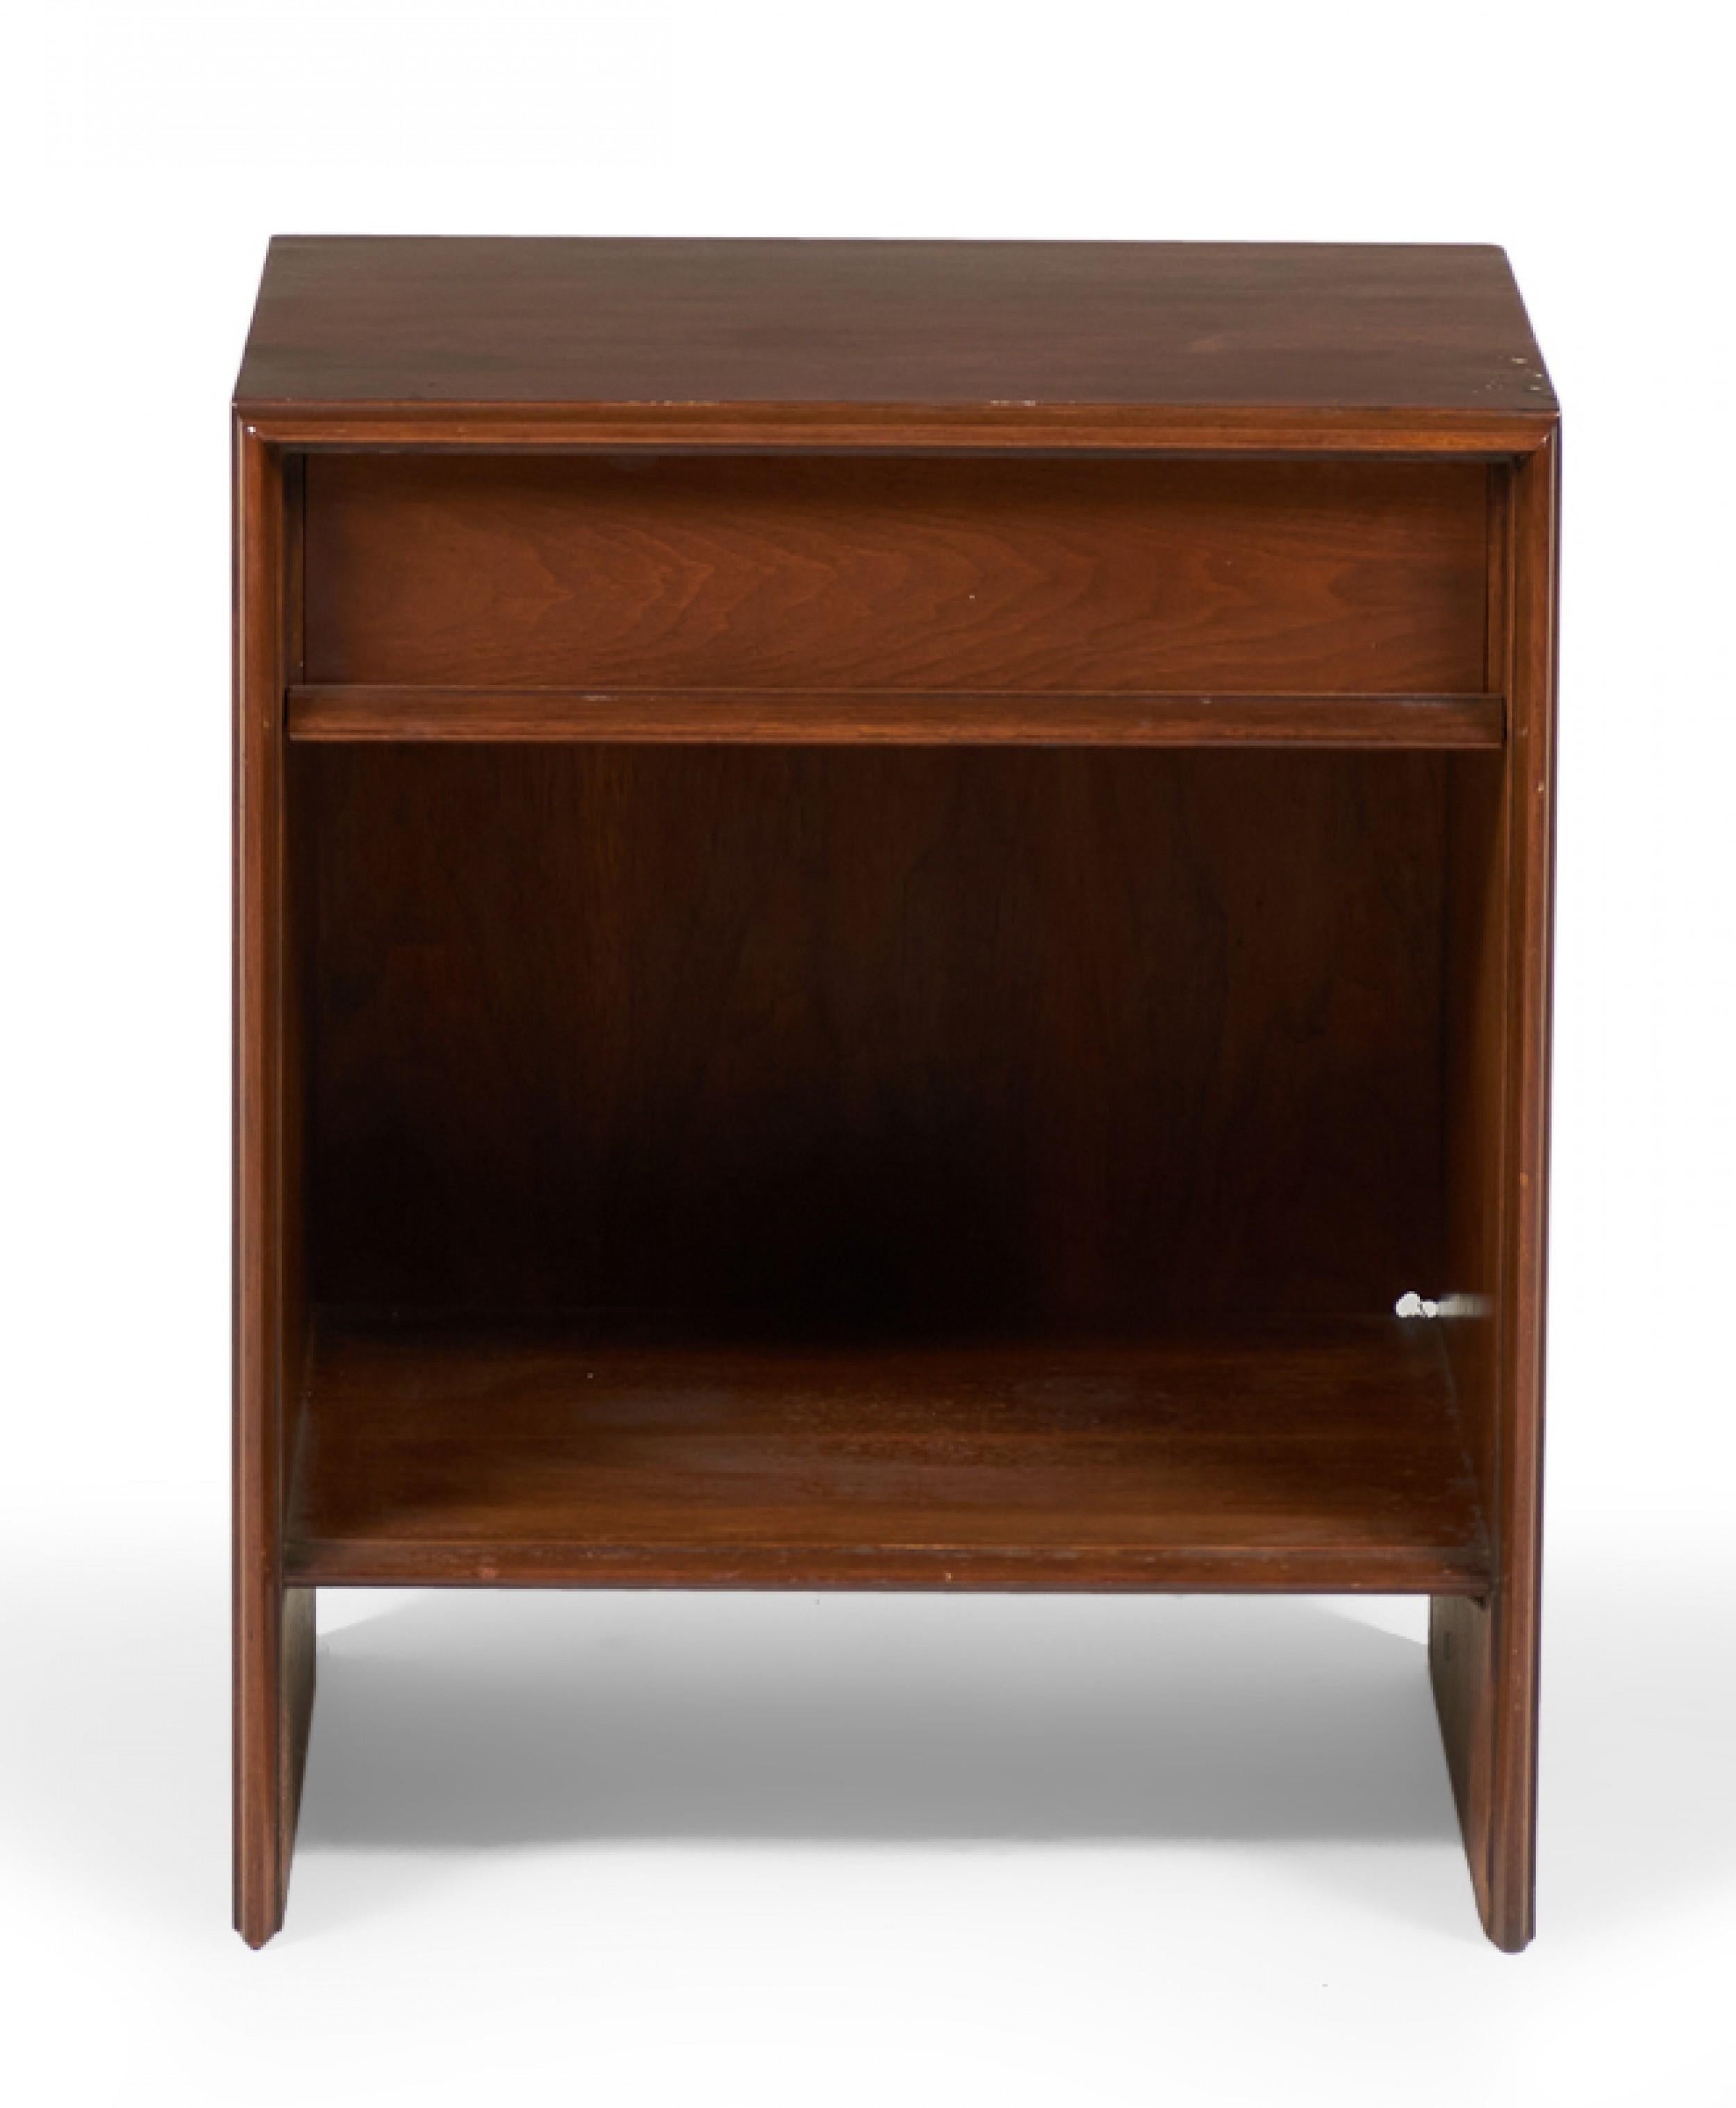 American Mid-Century Modern (circa 1950) nightstand in walnut, comprised of a single recessed top drawer, a lower shelf, and tapered round nose edge detail to the frame. (T.H. ROBSJOHN-GIBBINGS FOR WIDDICOMB, has original Widdicomb label.)
